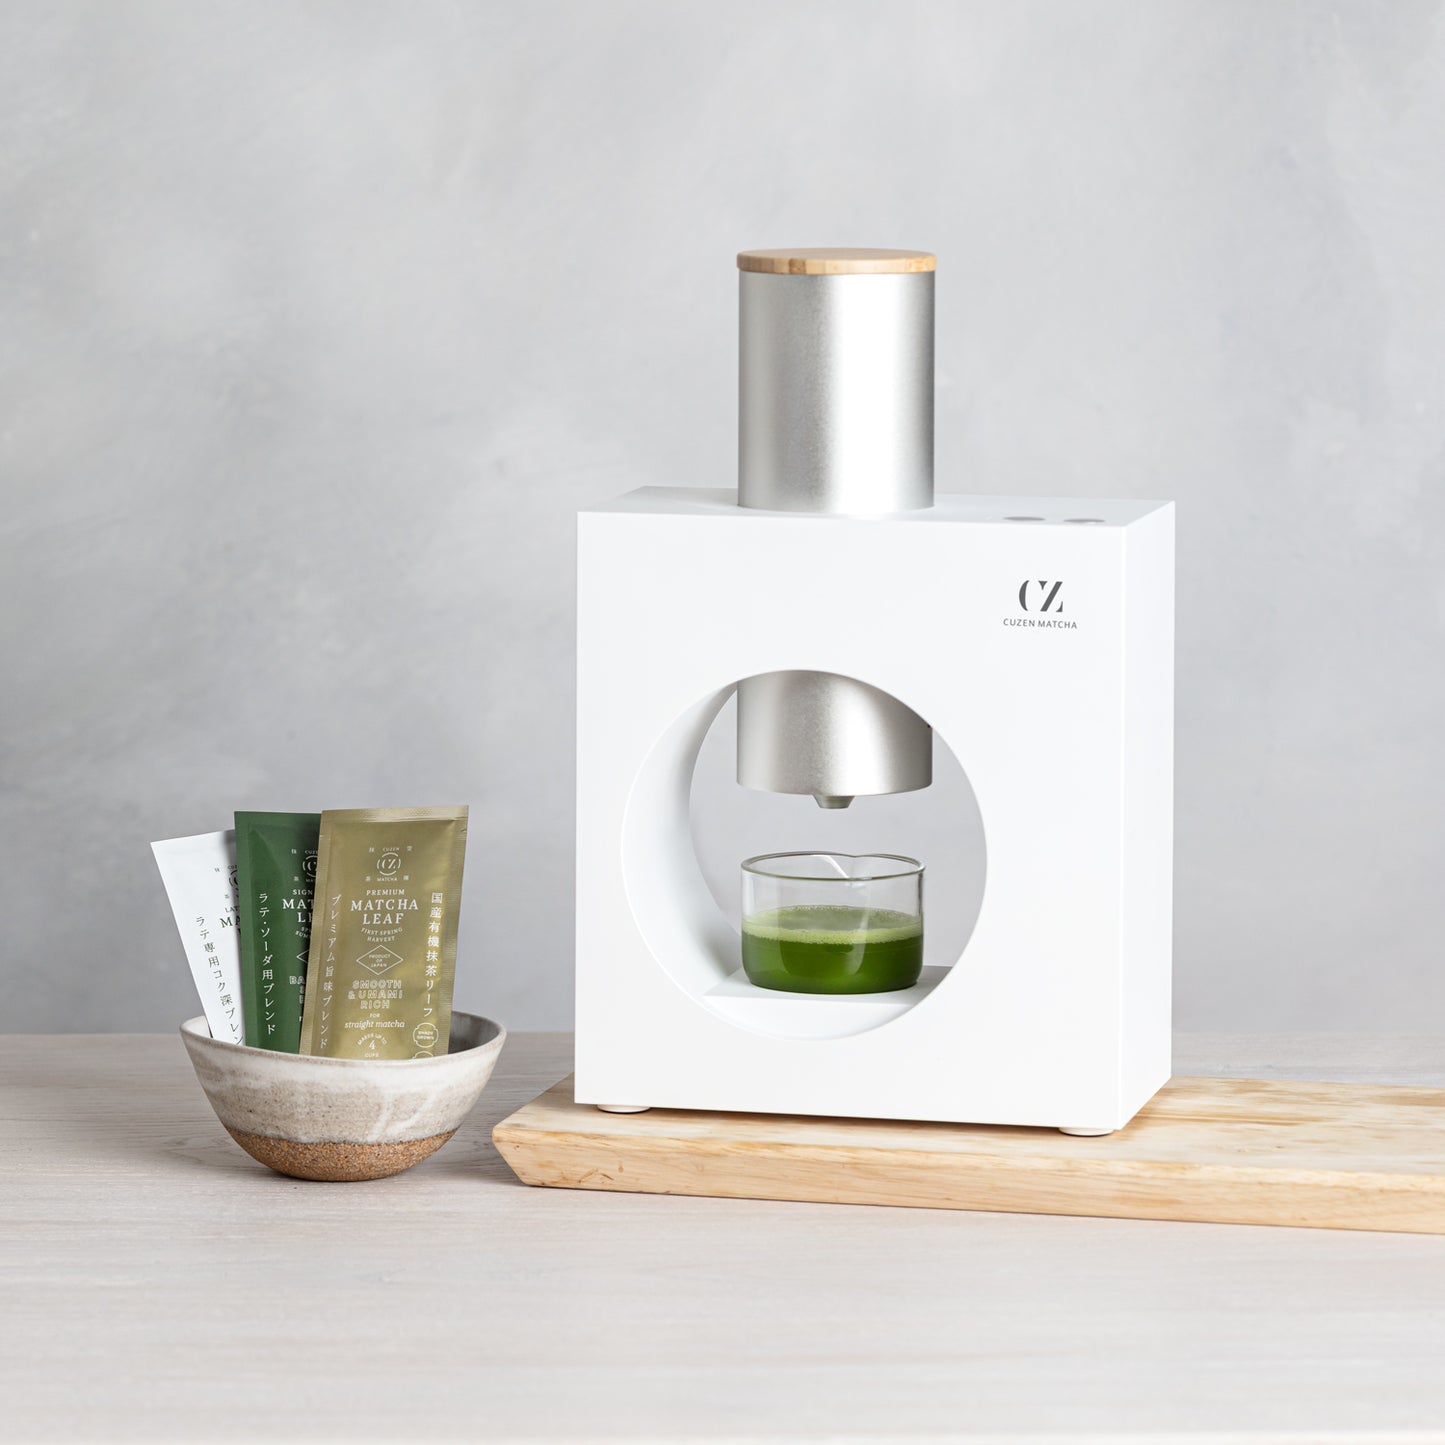  Cuzen Matcha Maker Starter Kit, an Innovative At-home Matcha  Machine that Produces Freshly Ground Matcha from Organic Shade-grown  Japanese Tea Leaves (White): Home & Kitchen